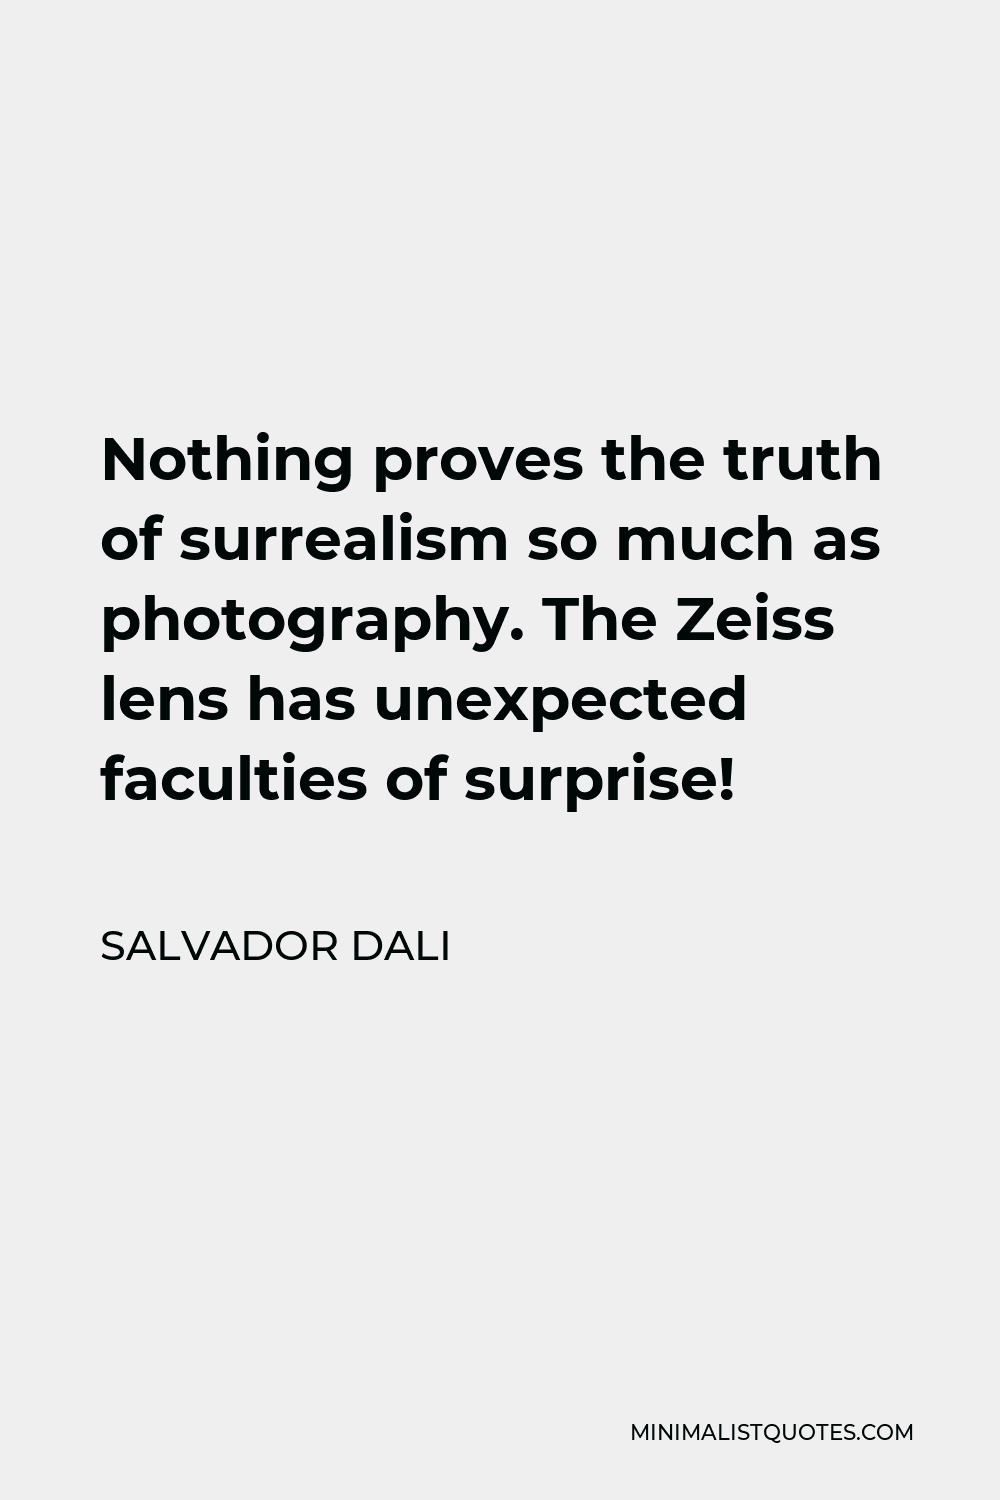 Salvador Dali Quote - Nothing proves the truth of surrealism so much as photography. The Zeiss lens has unexpected faculties of surprise!